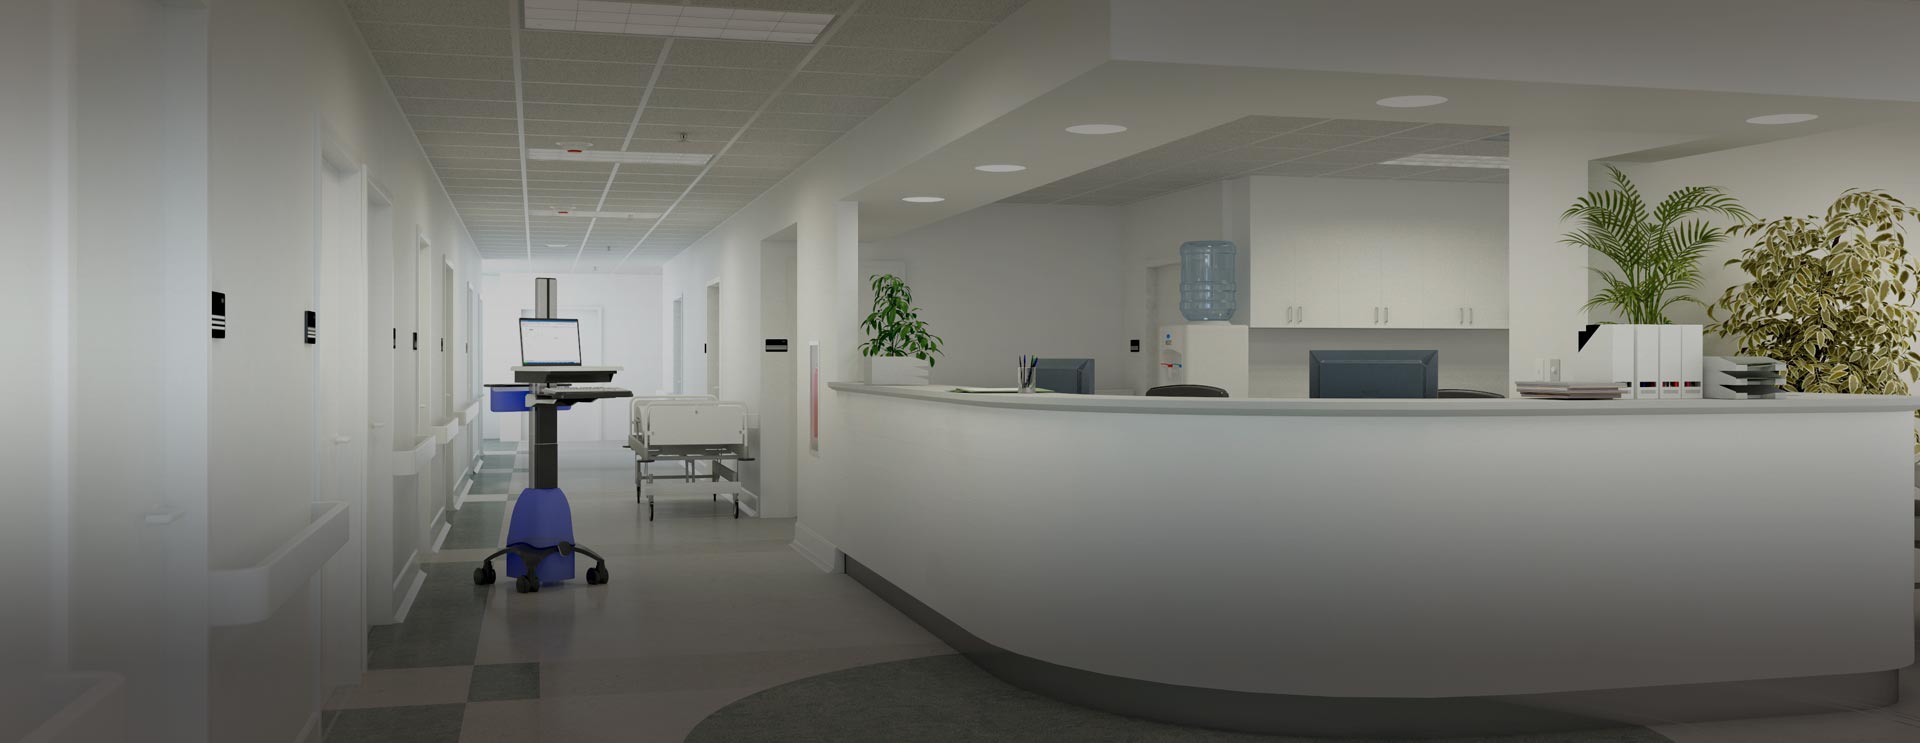 Healthcare Cleaning Services UK